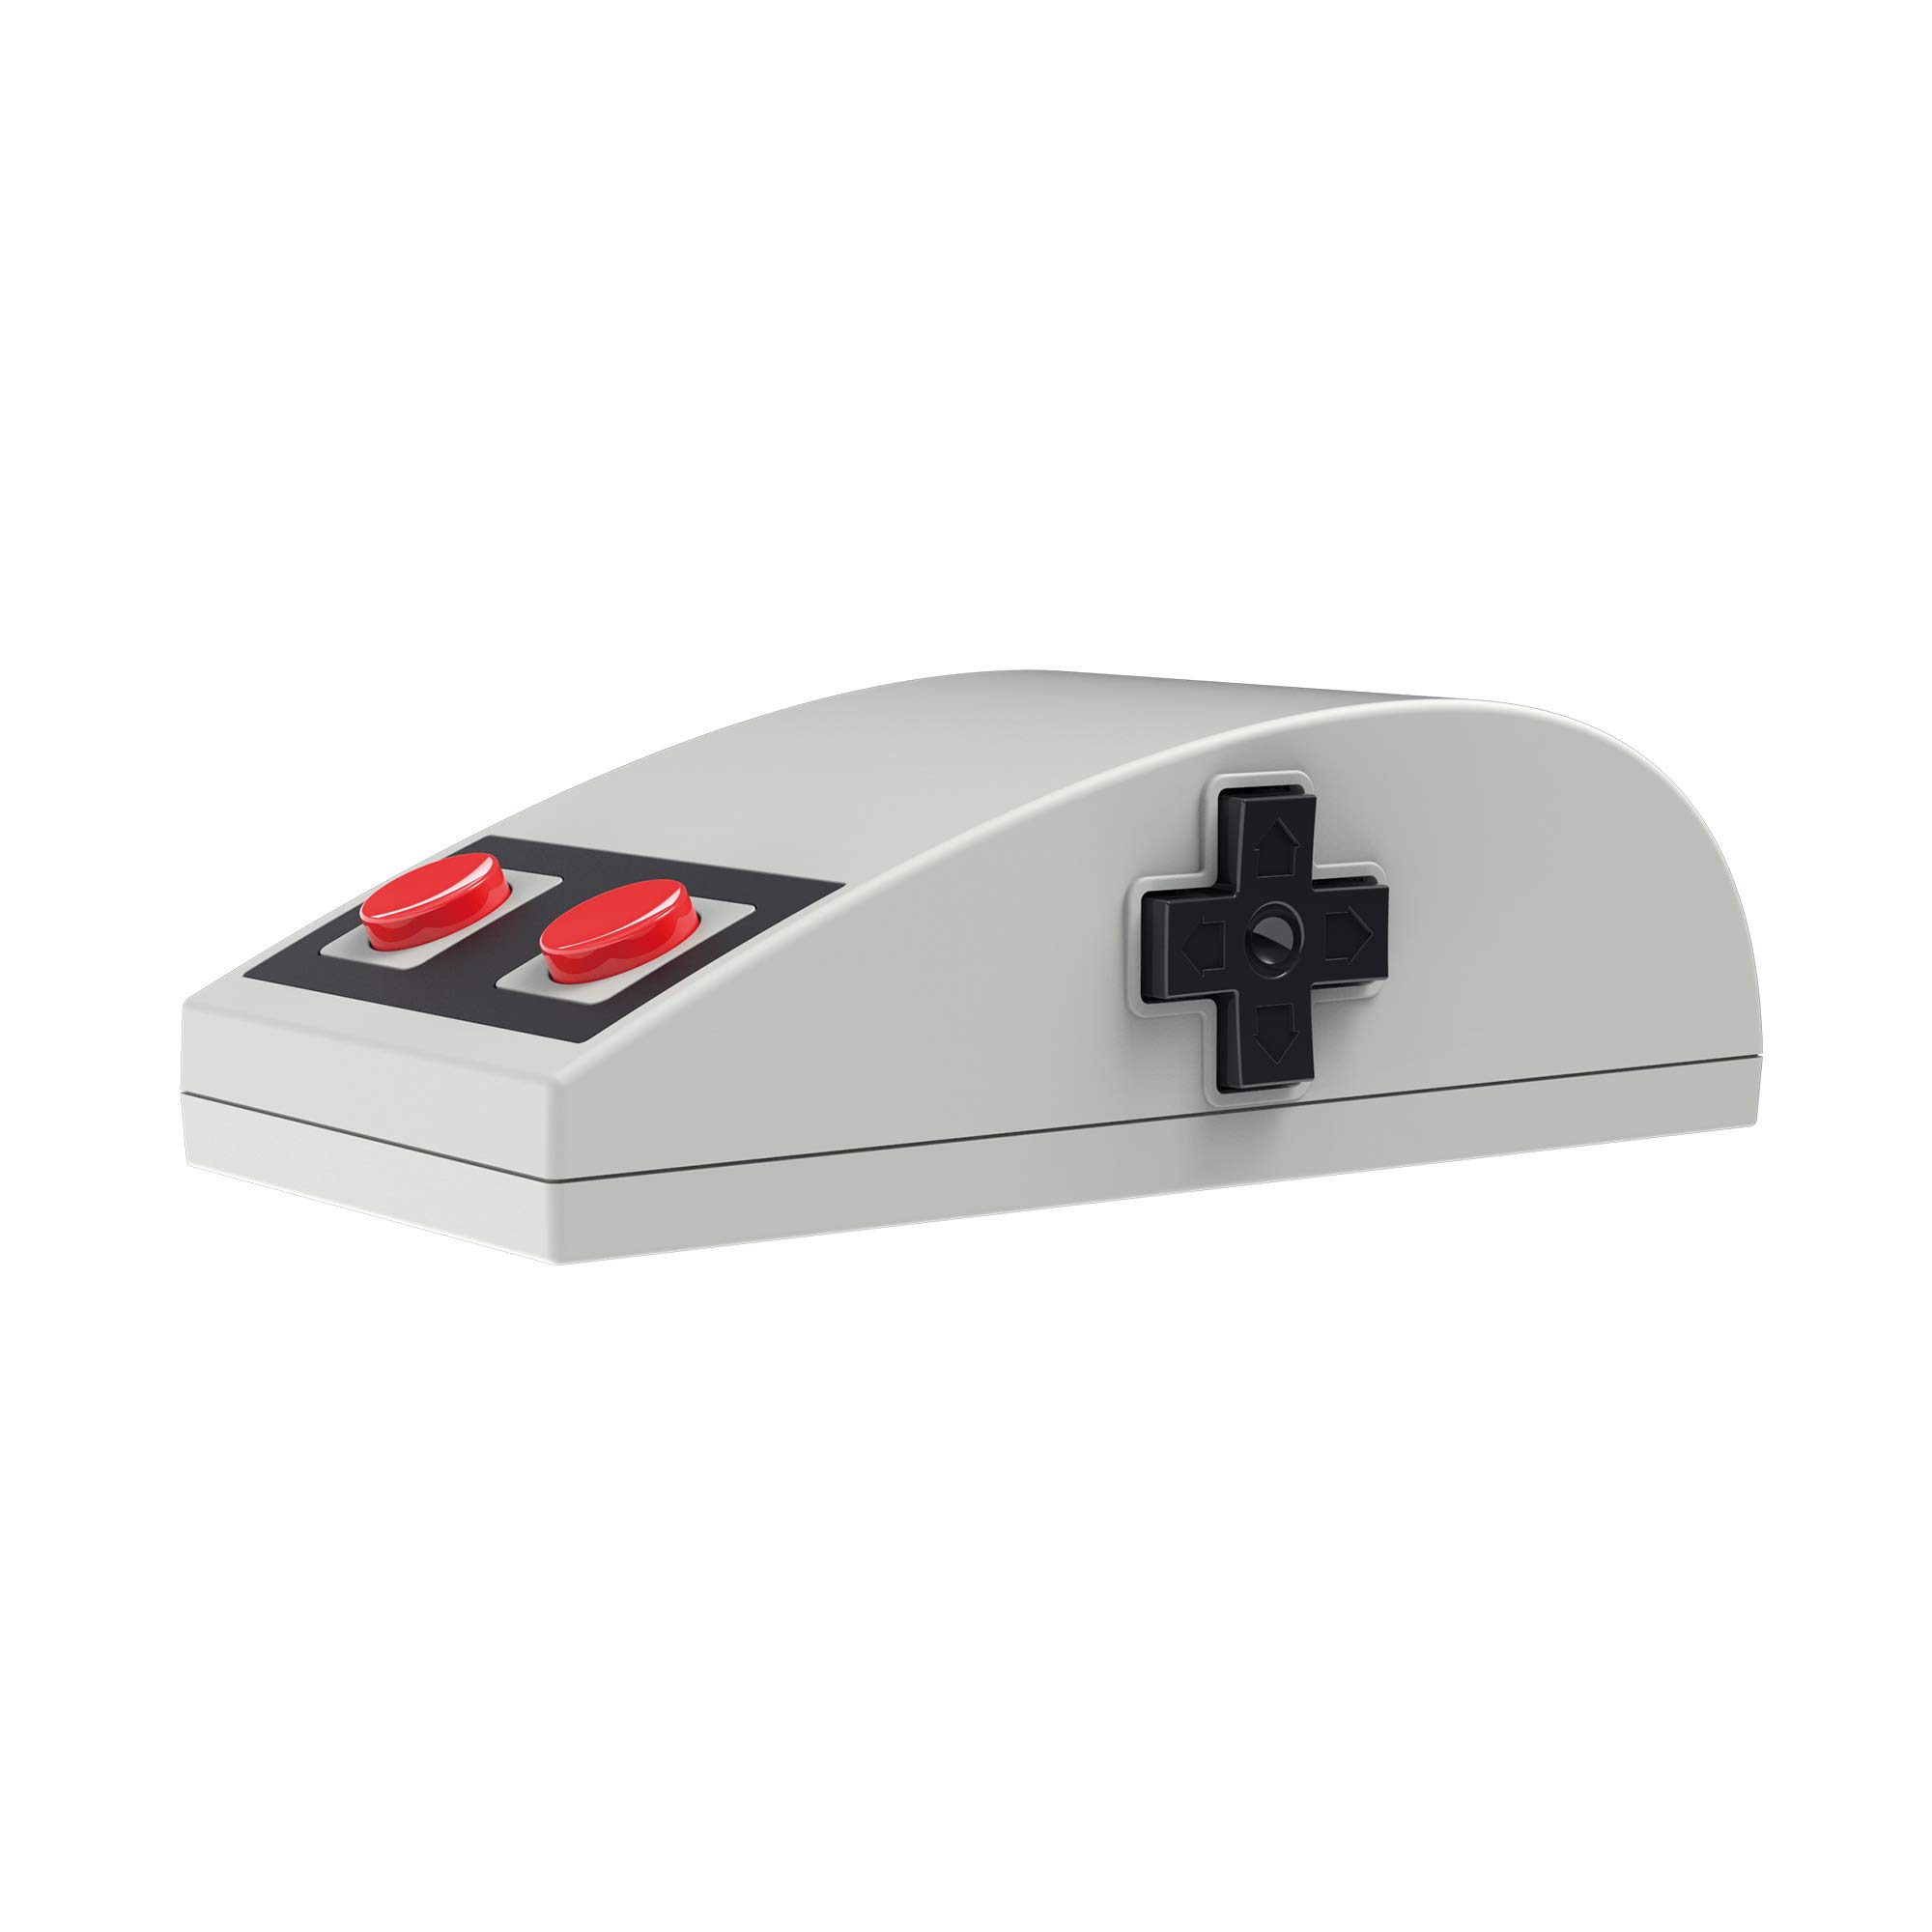 8Bitdo N30 2.4Ghz Wireless Mouse for PC Windows and macOS